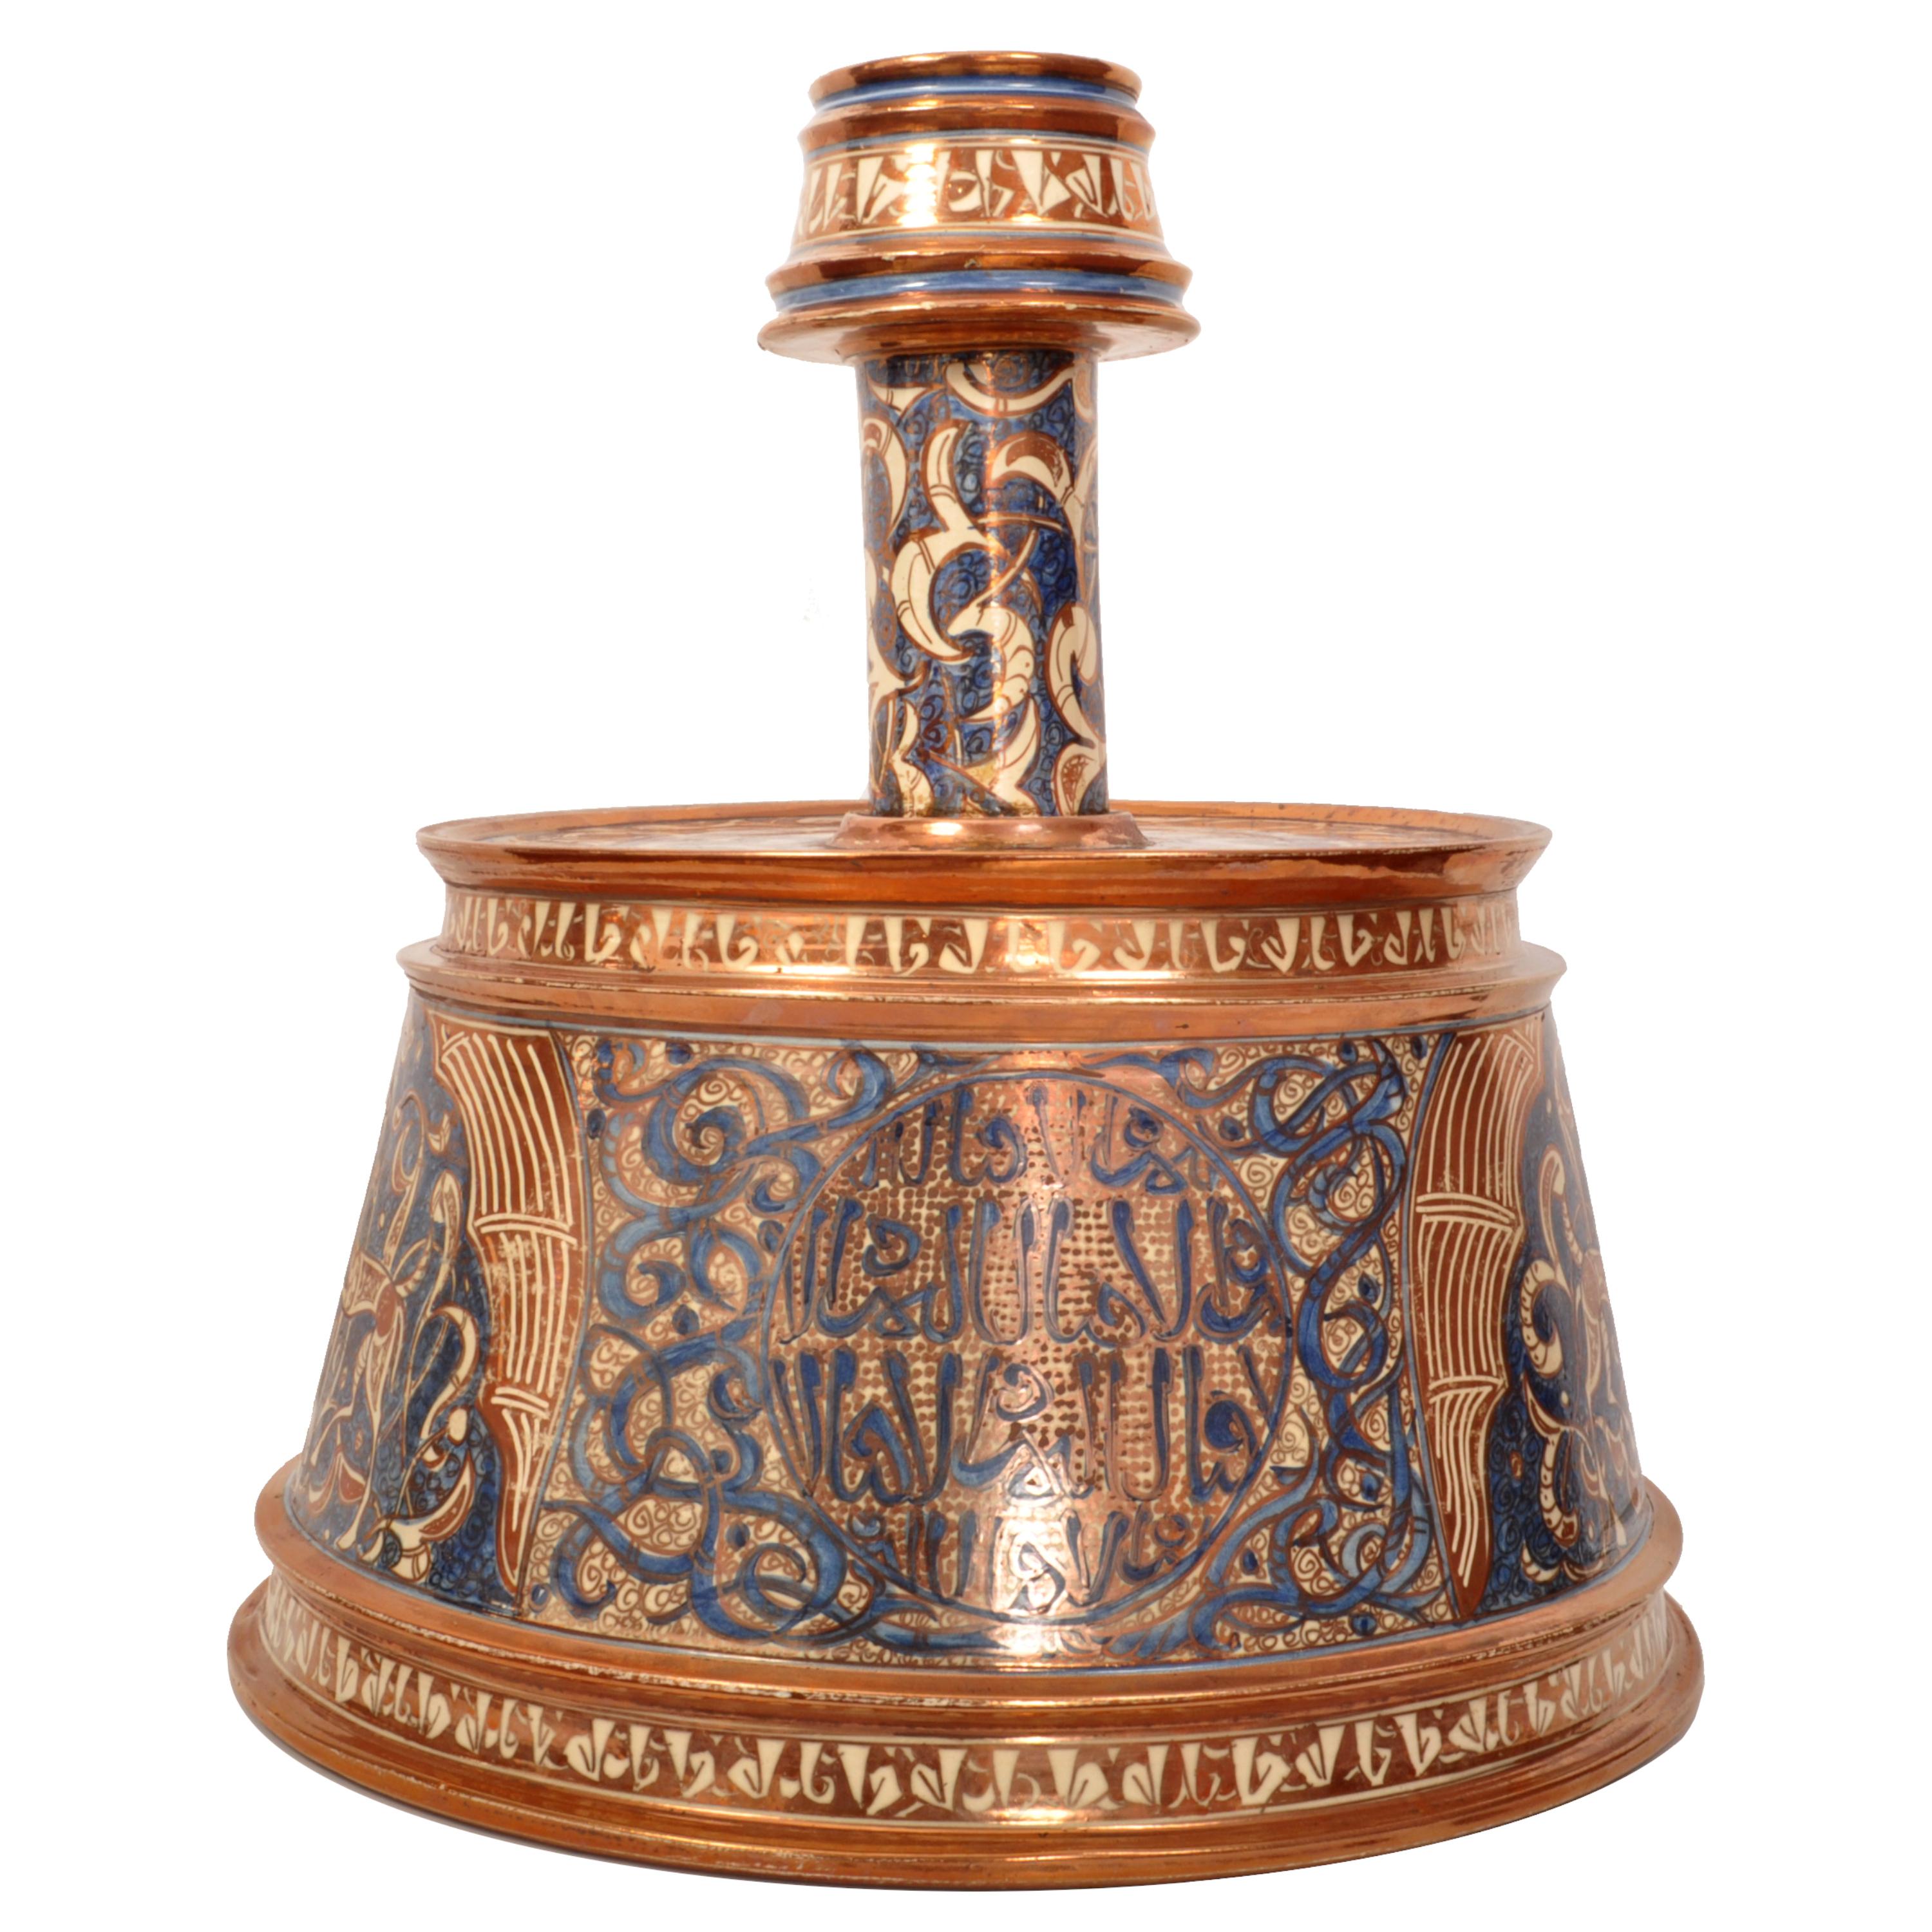 Incredibly rare/unique & monumental antique Mamluk/Nasrid Islamic pottery copper lustre candlestick, circa 1870. 
This incredible pottery candlestick follows the the form of a 14th Century Mamluk period inlaid brass candlestick from Syria. The